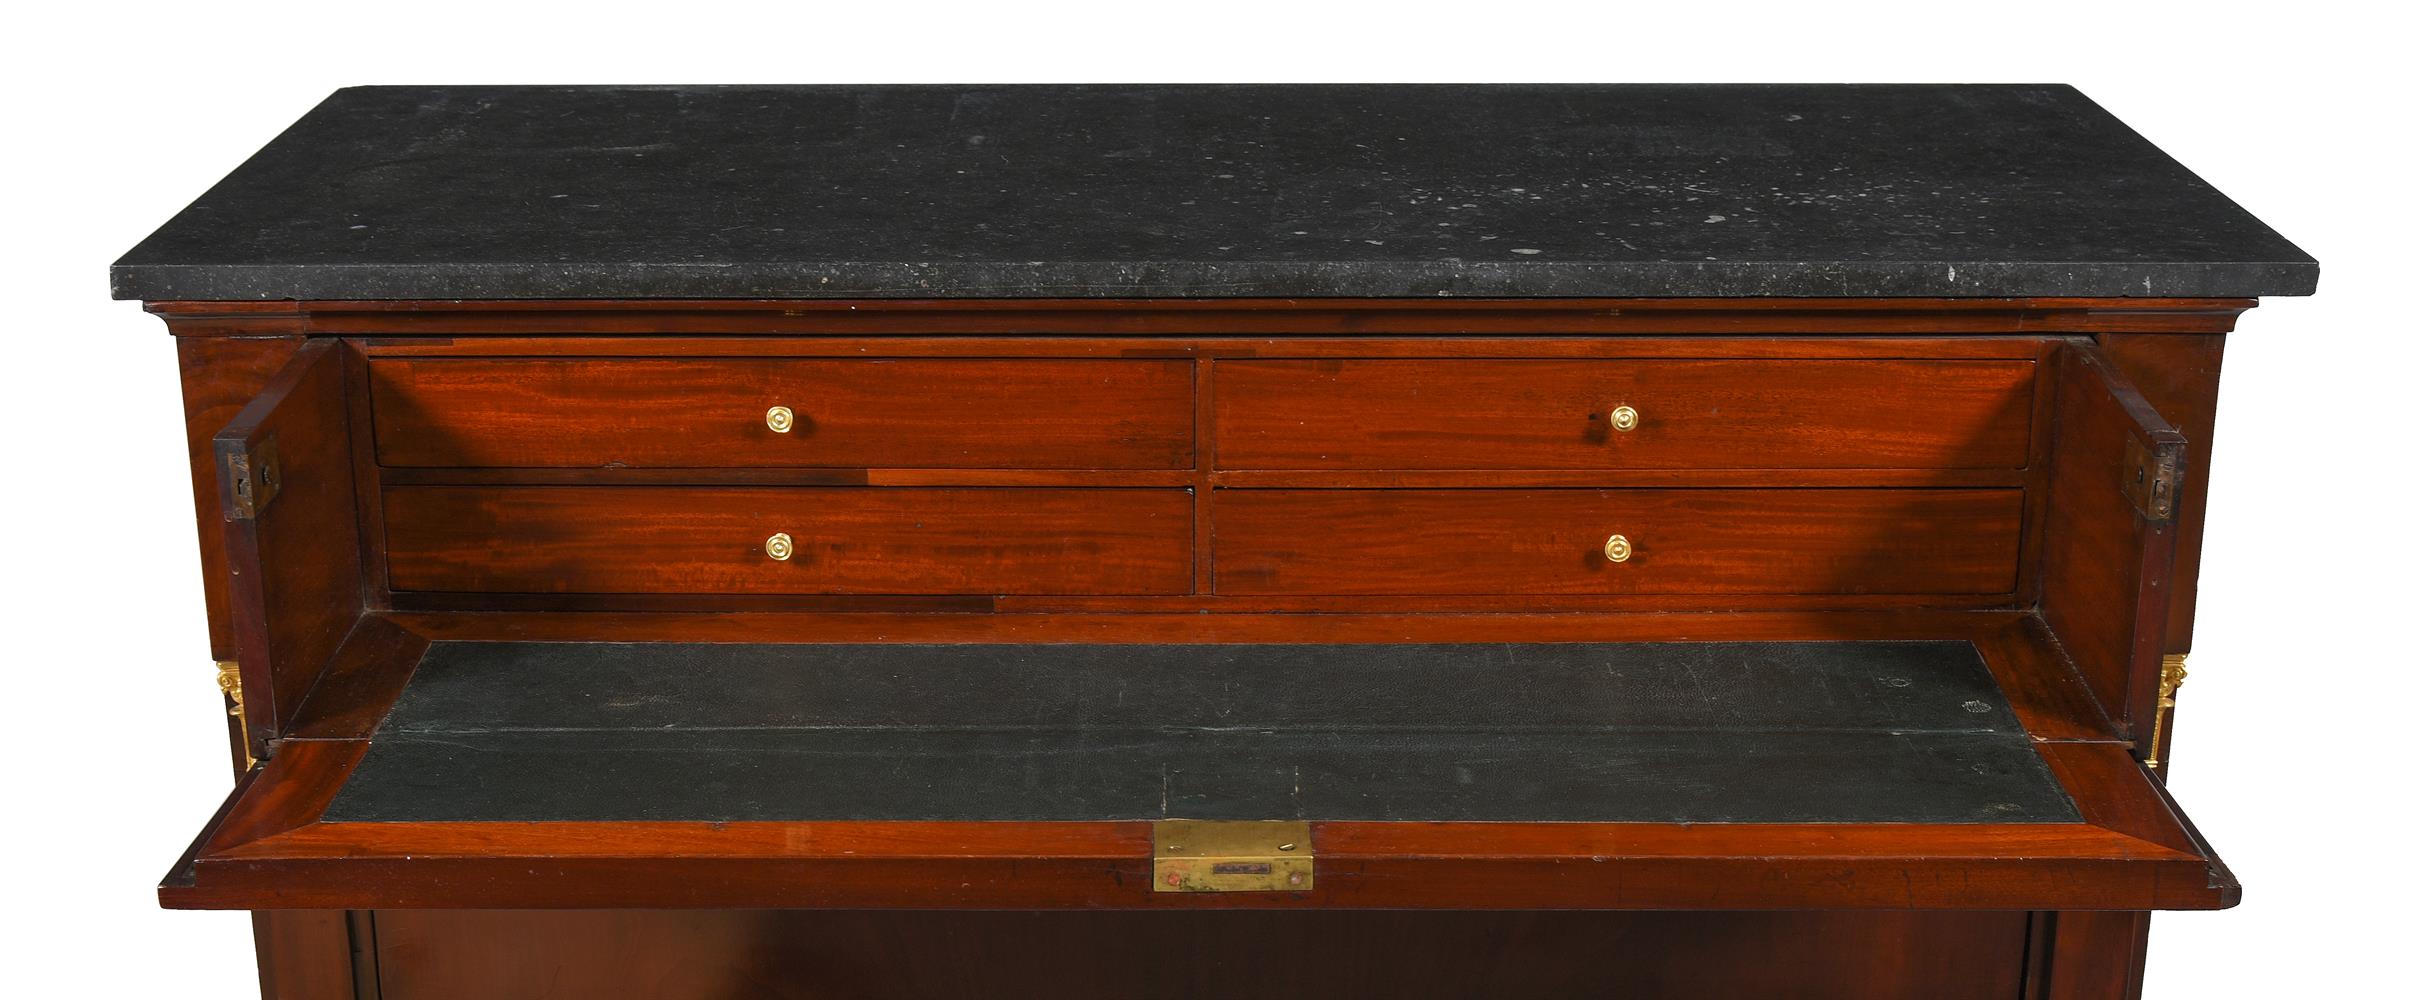 AN EMPIRE MAHOGANY AND ORMOLU MOUNTED SECRETAIRE CHEST, CIRCA 1820 - Image 2 of 4